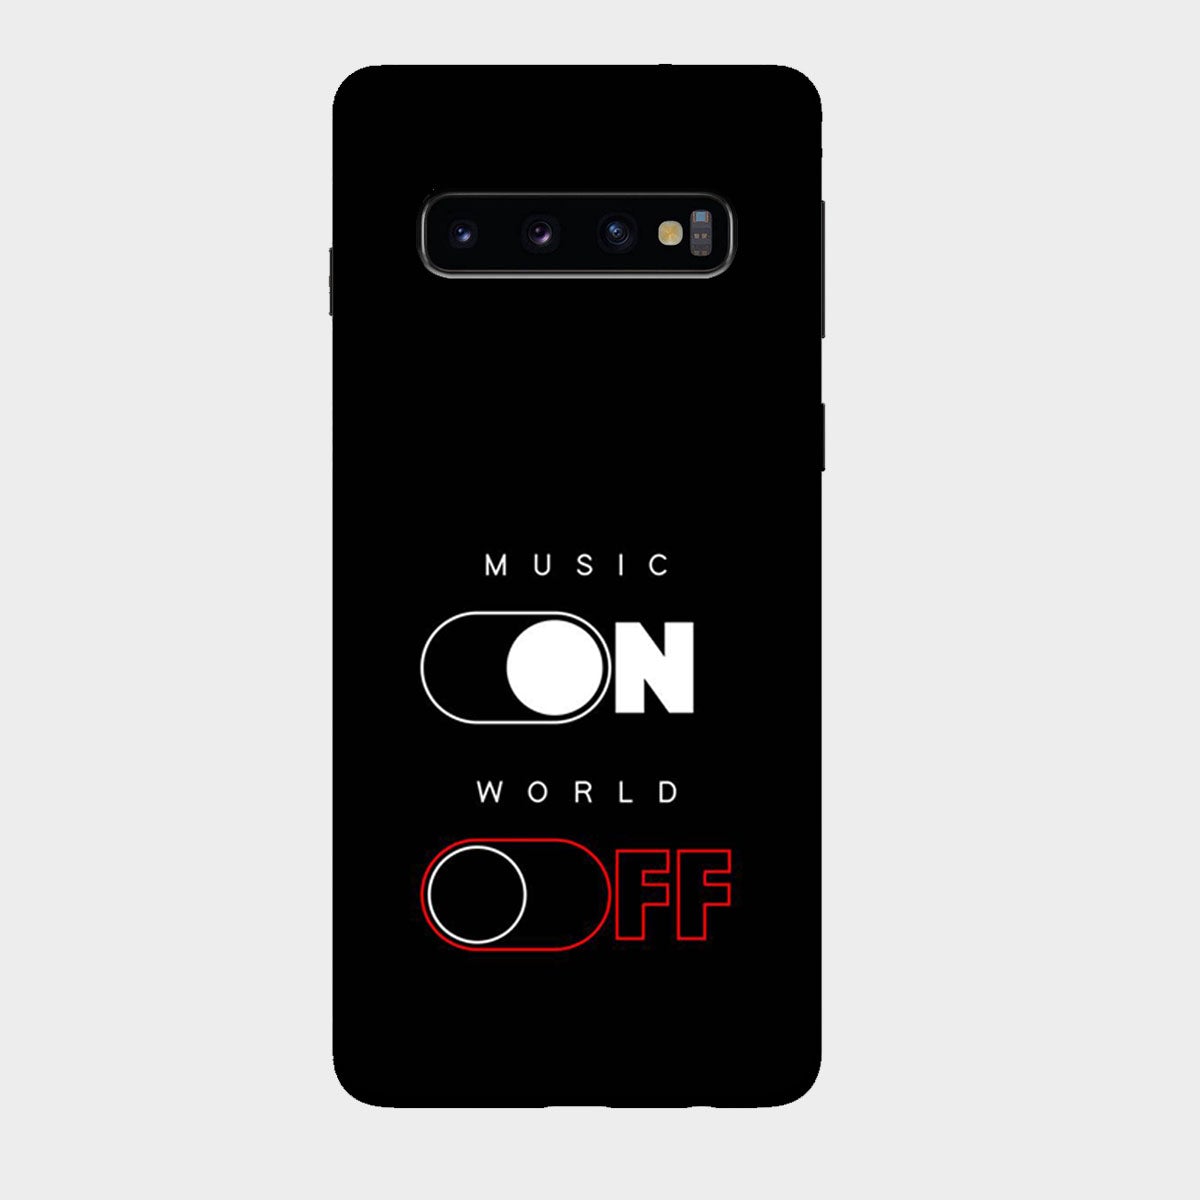 Music On World Off - Mobile Phone Cover - Hard Case - Samsung - Samsung